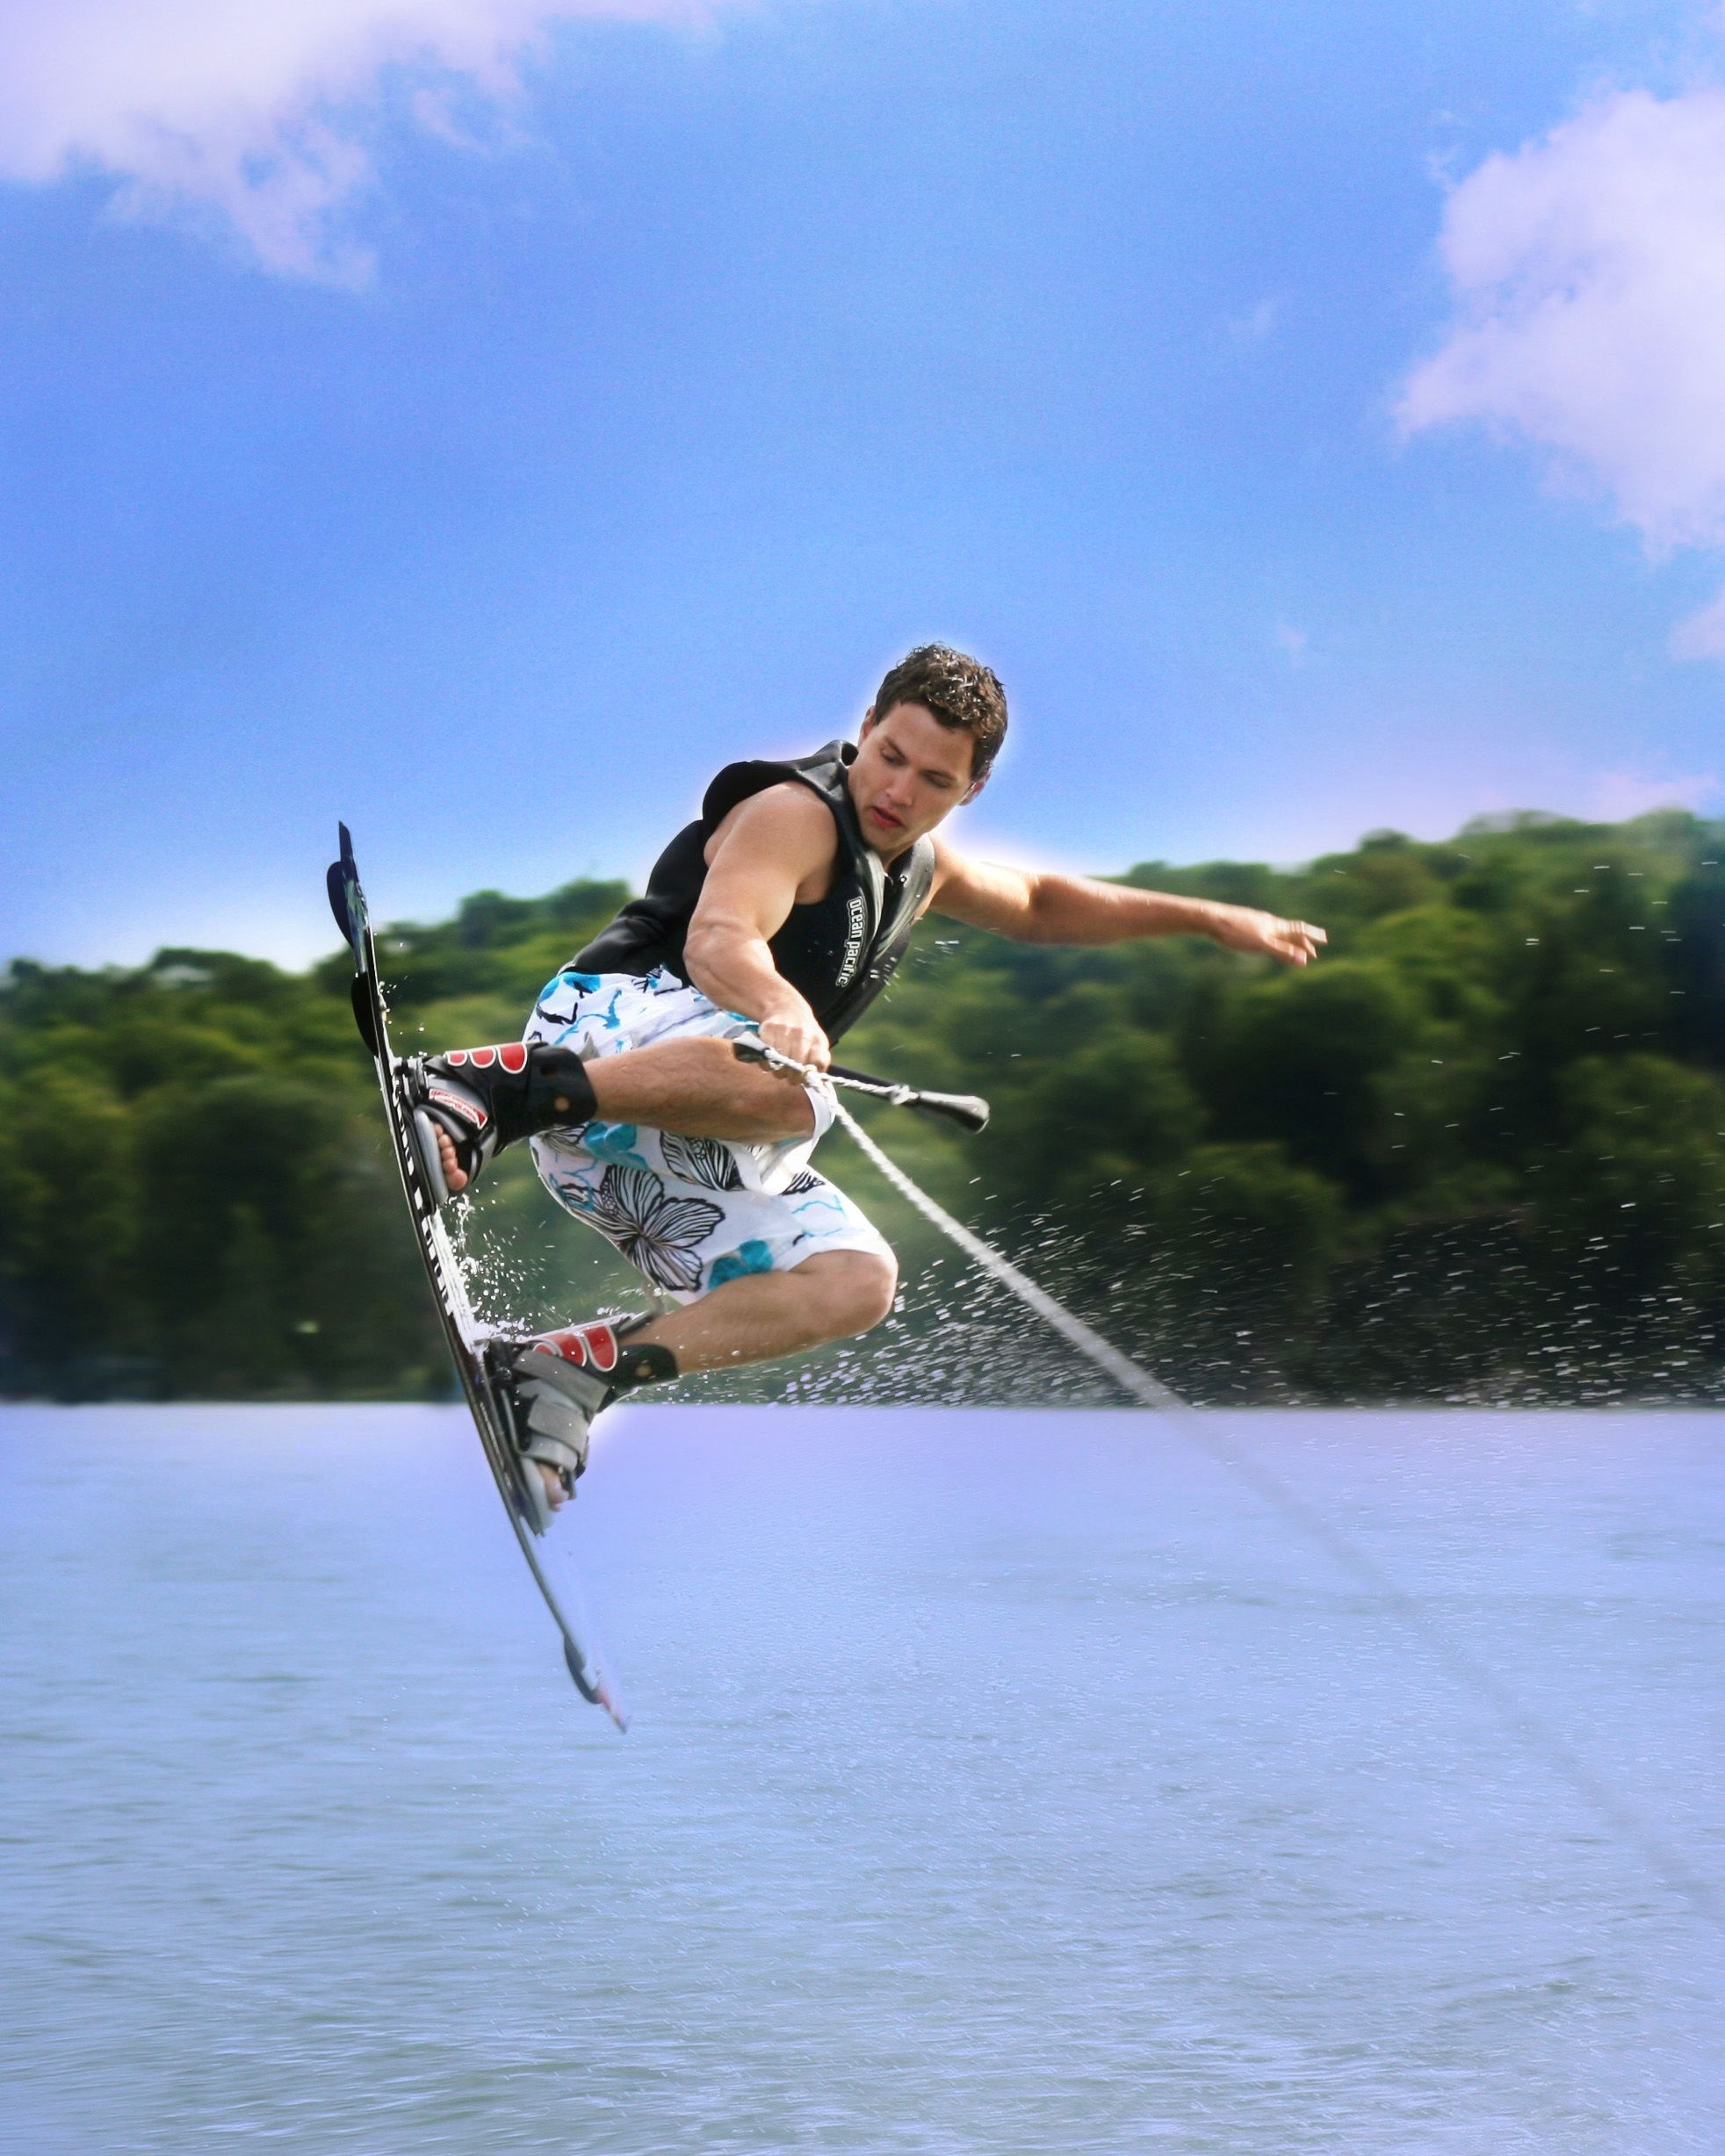 Wakeboarding: Aerial maneuvers during riding a wakeboard towed behind a motorboat. 1970x2460 HD Wallpaper.